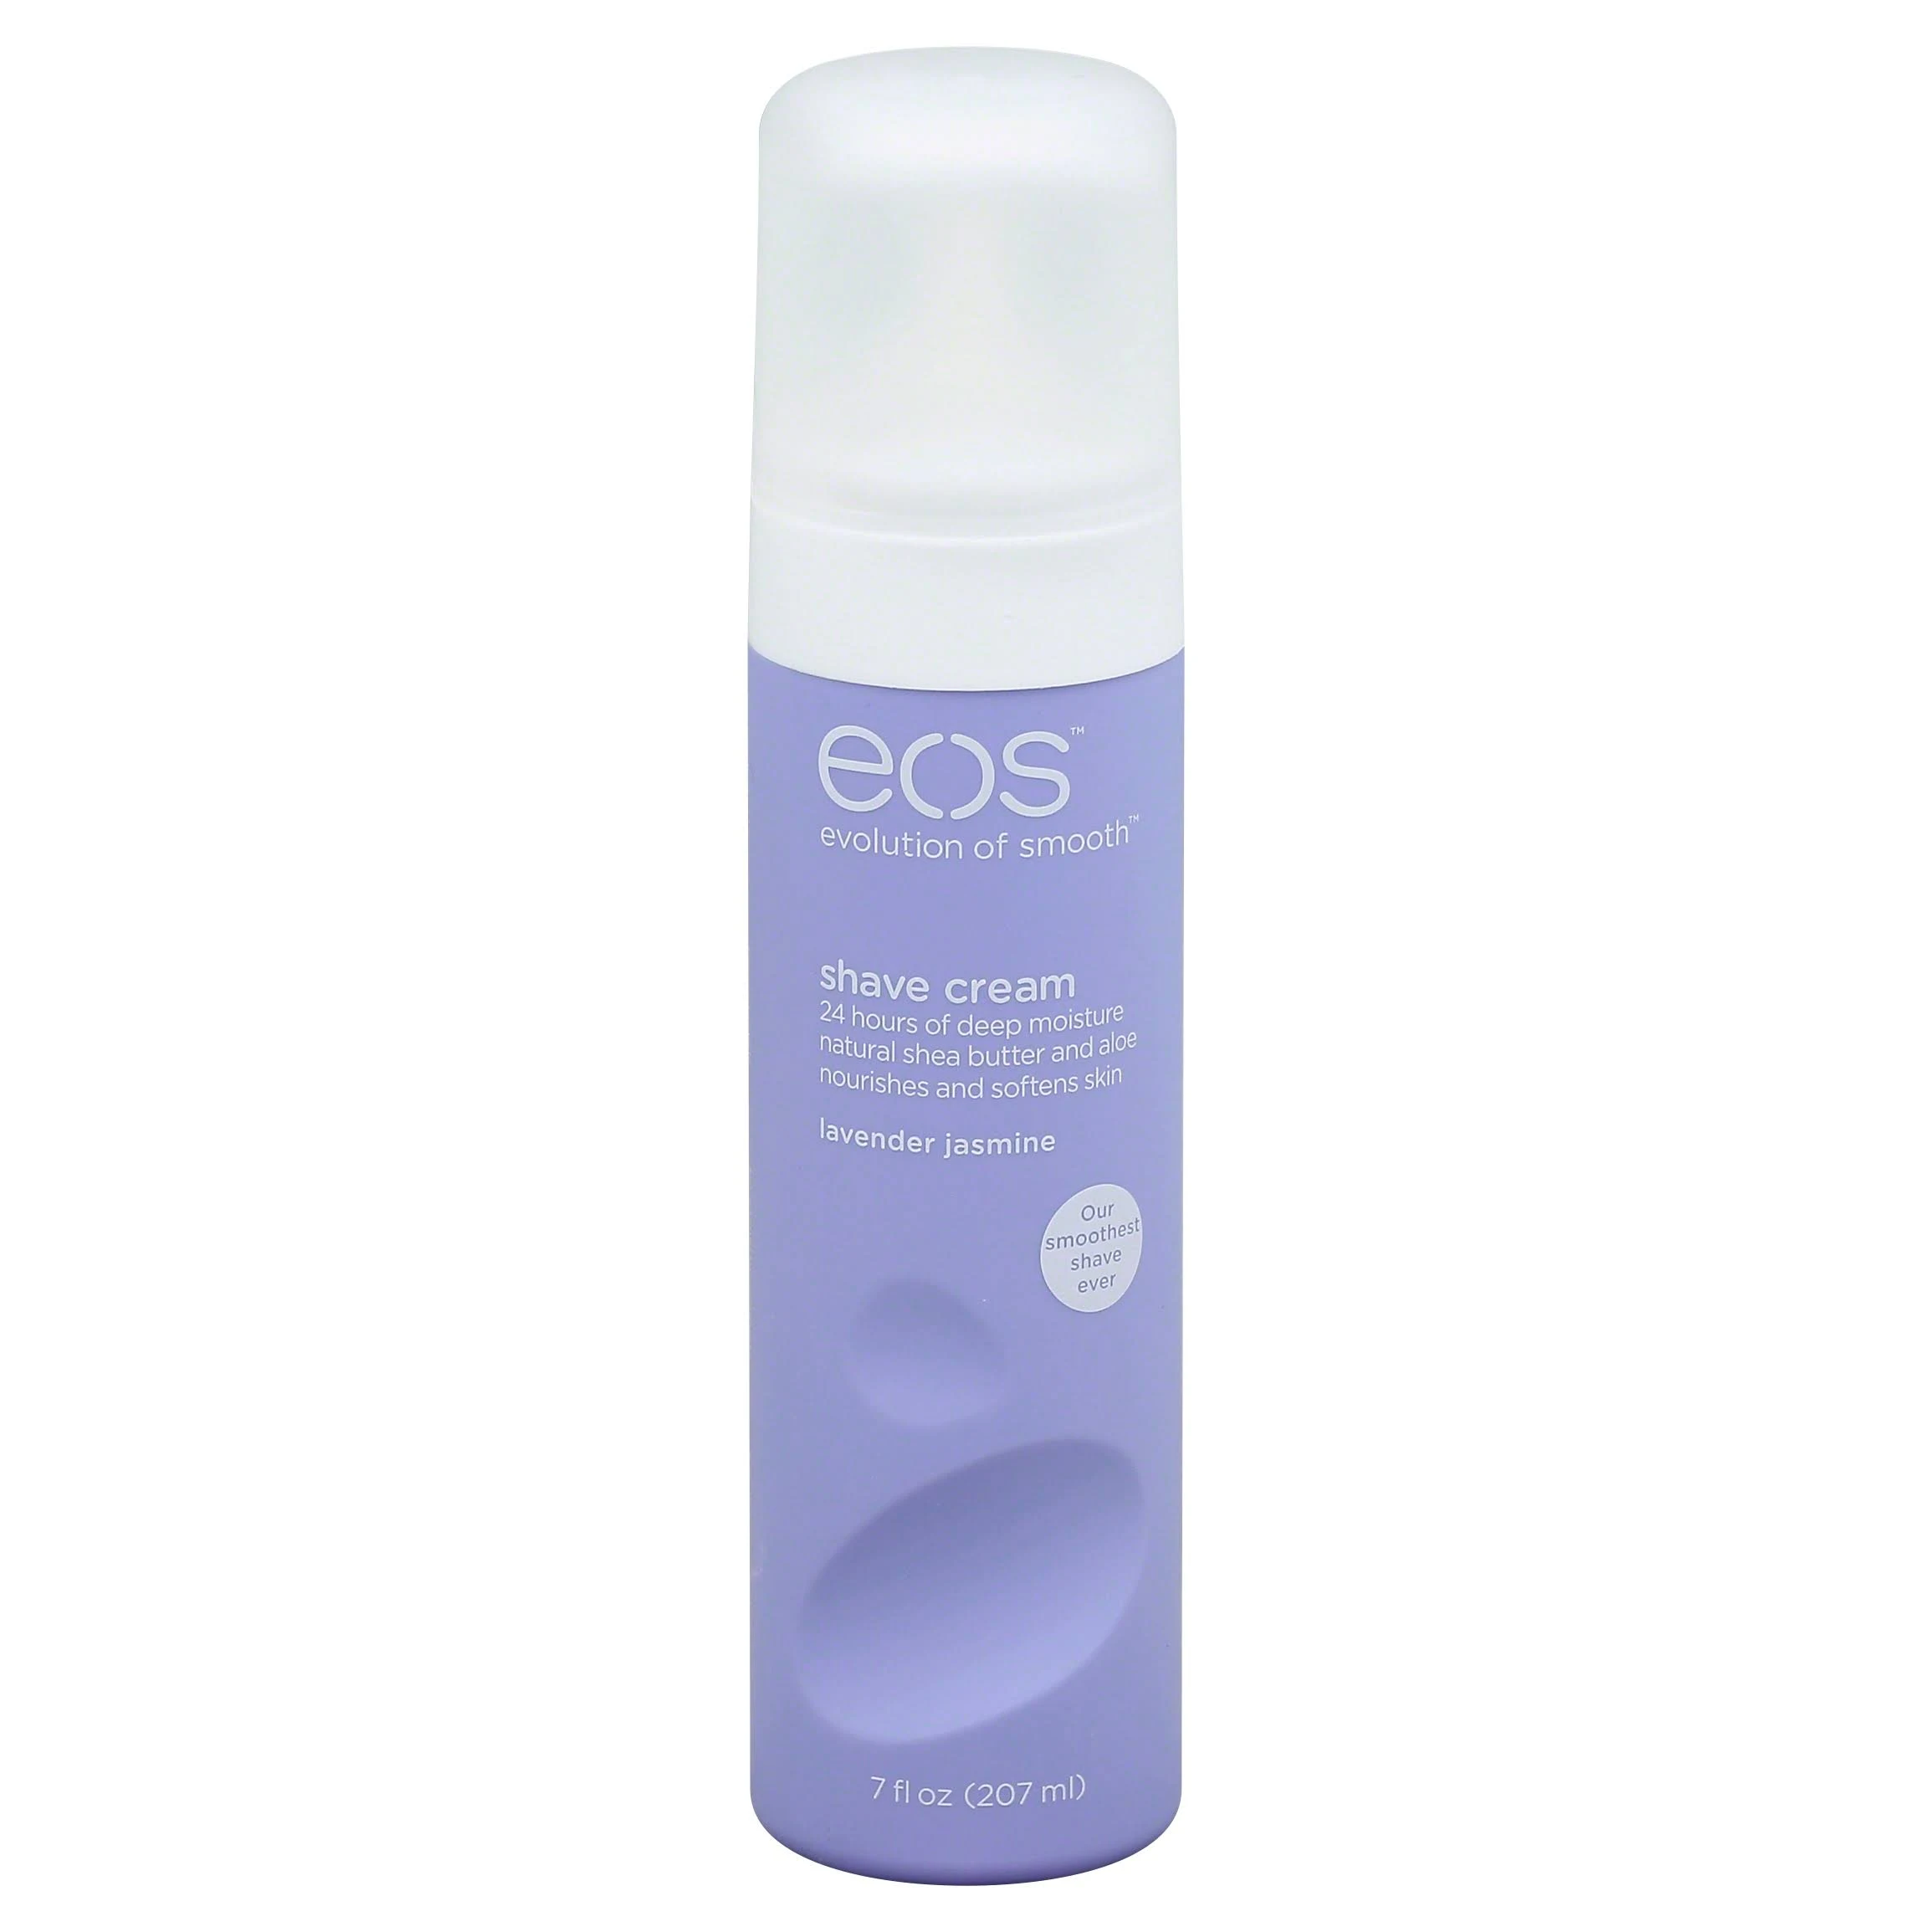 Eos Shave Cream Lavender Jasmine 7 Oz  By Evolution Of Smooth Products L